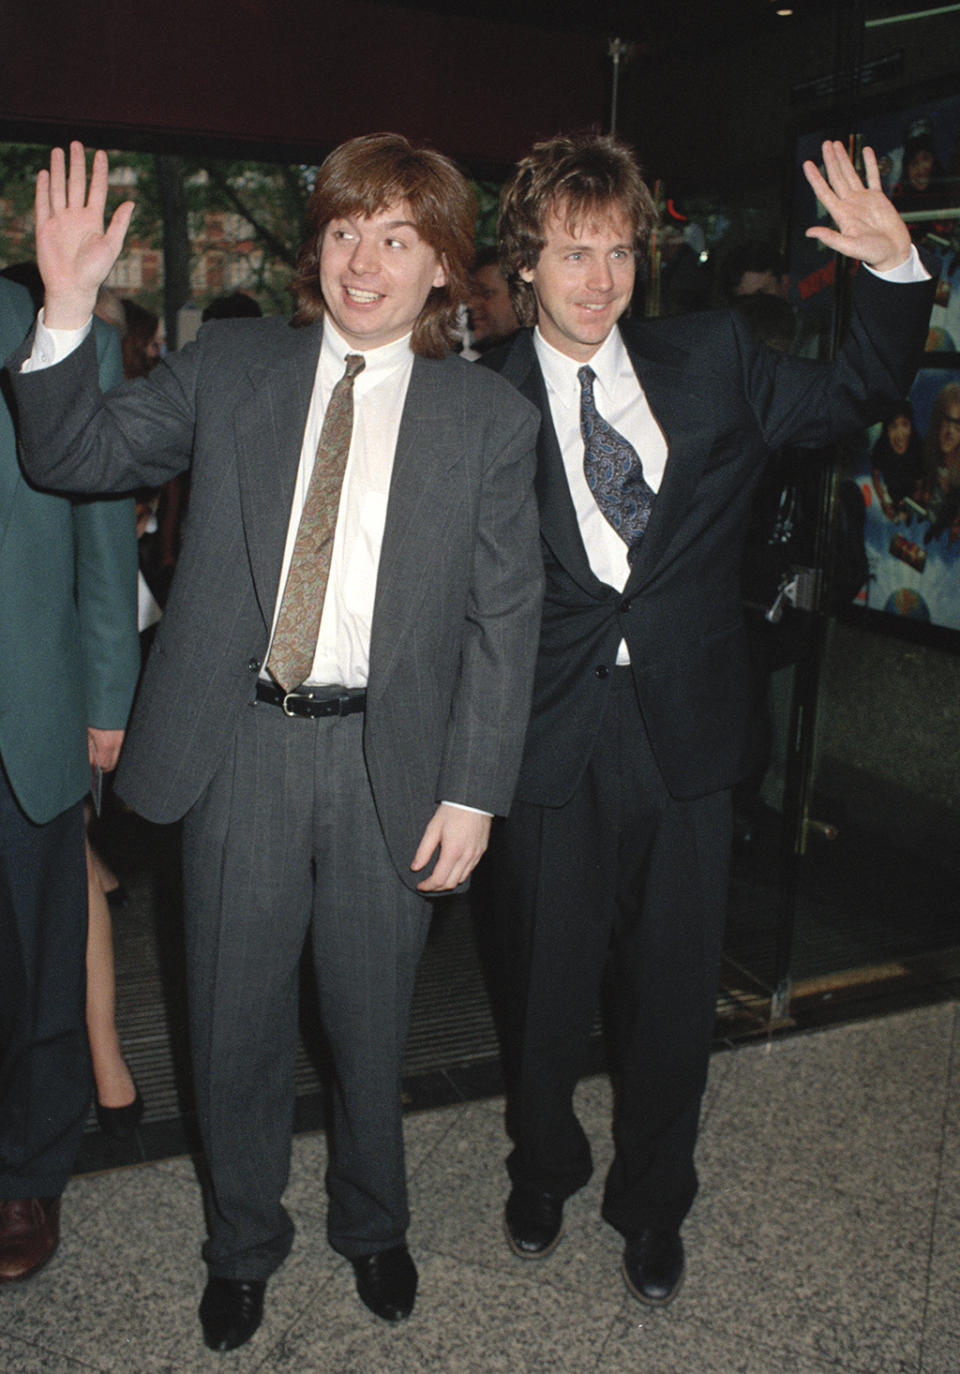 <p>‘Wayne’s World’ opened in the U.K. on May 21, 1992, three months after it debuted in the U.S. Its leads made the trip for the London premiere. (Photo: Dave Benett/Getty Images) </p>